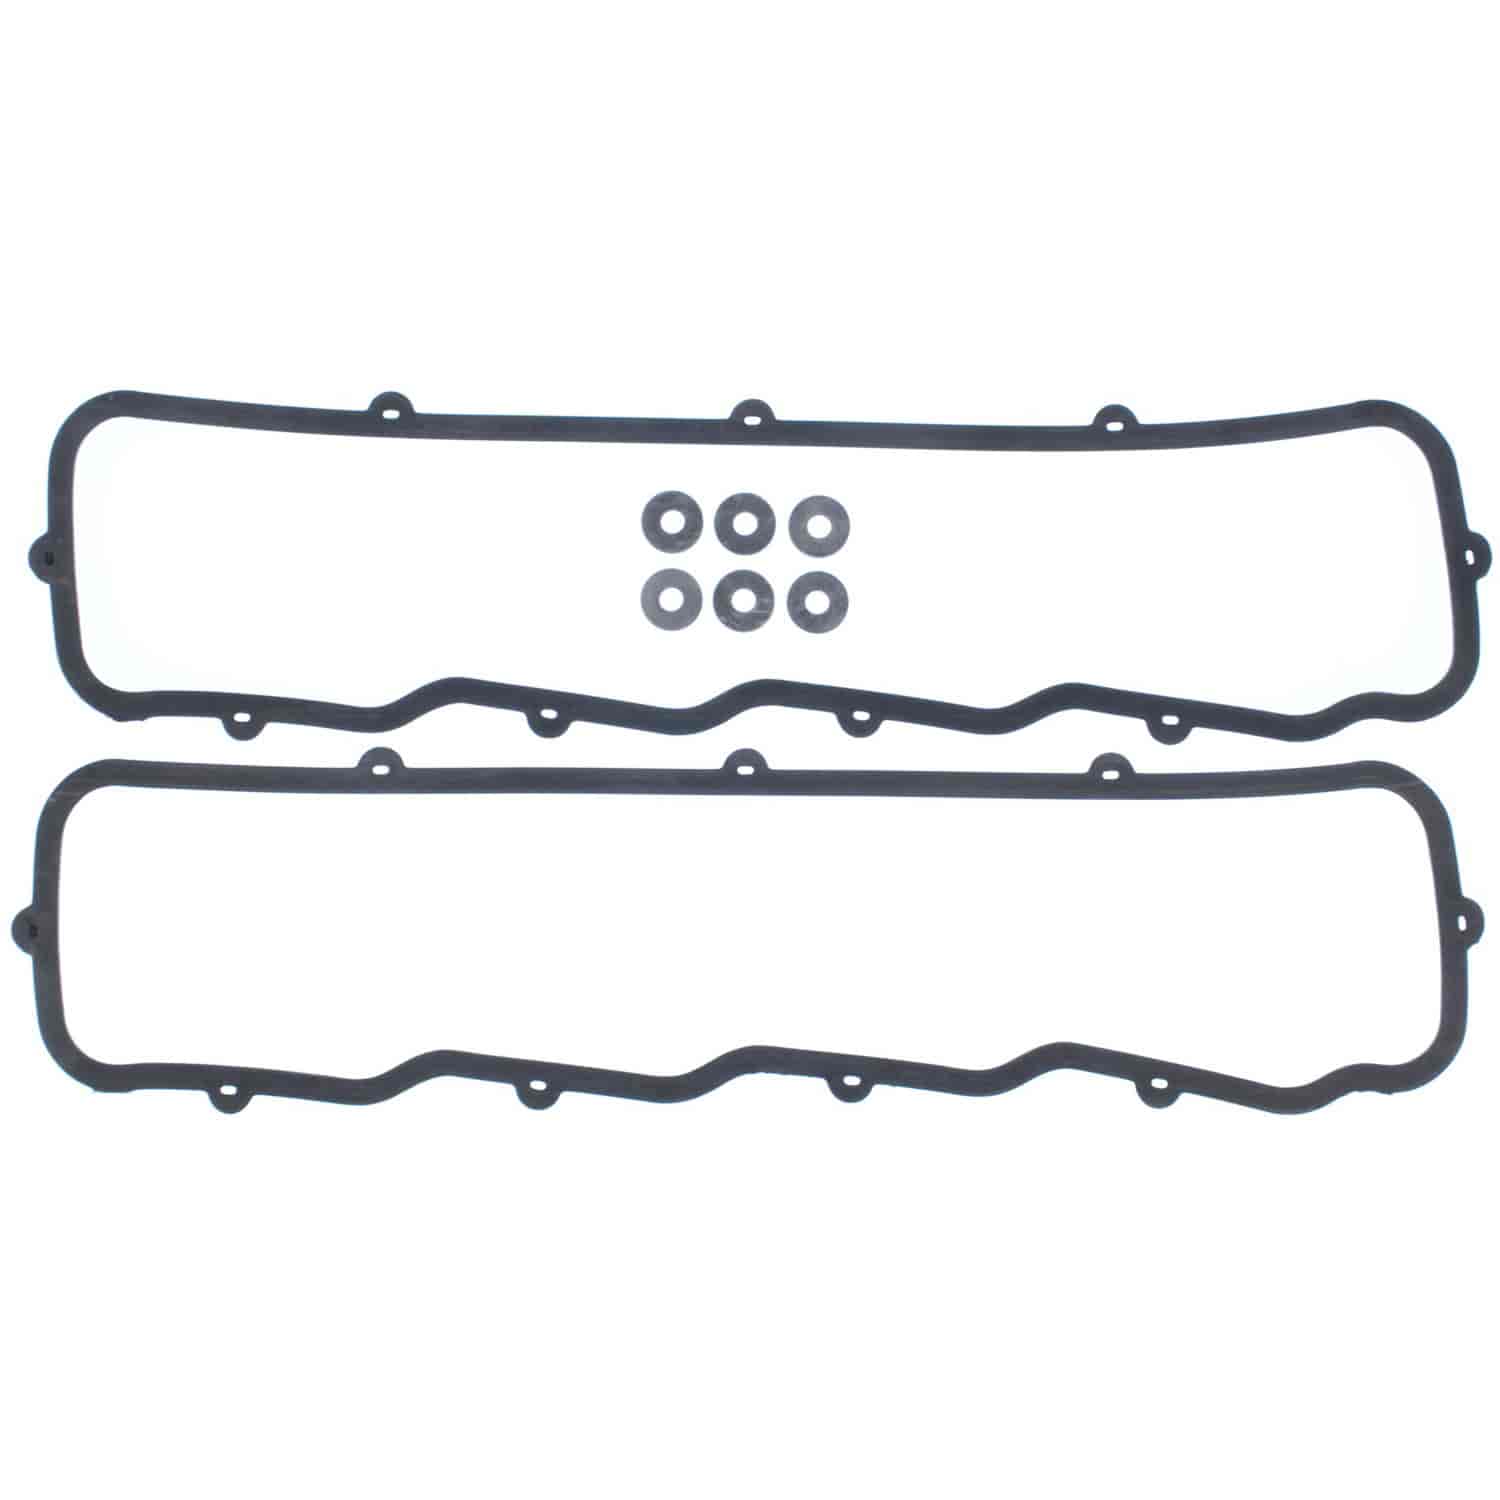 Valve Cover Gasket Set 1956-1967 Small Block Chrysler A Engine 277/301/303/313/318/326 in Molded Rubber